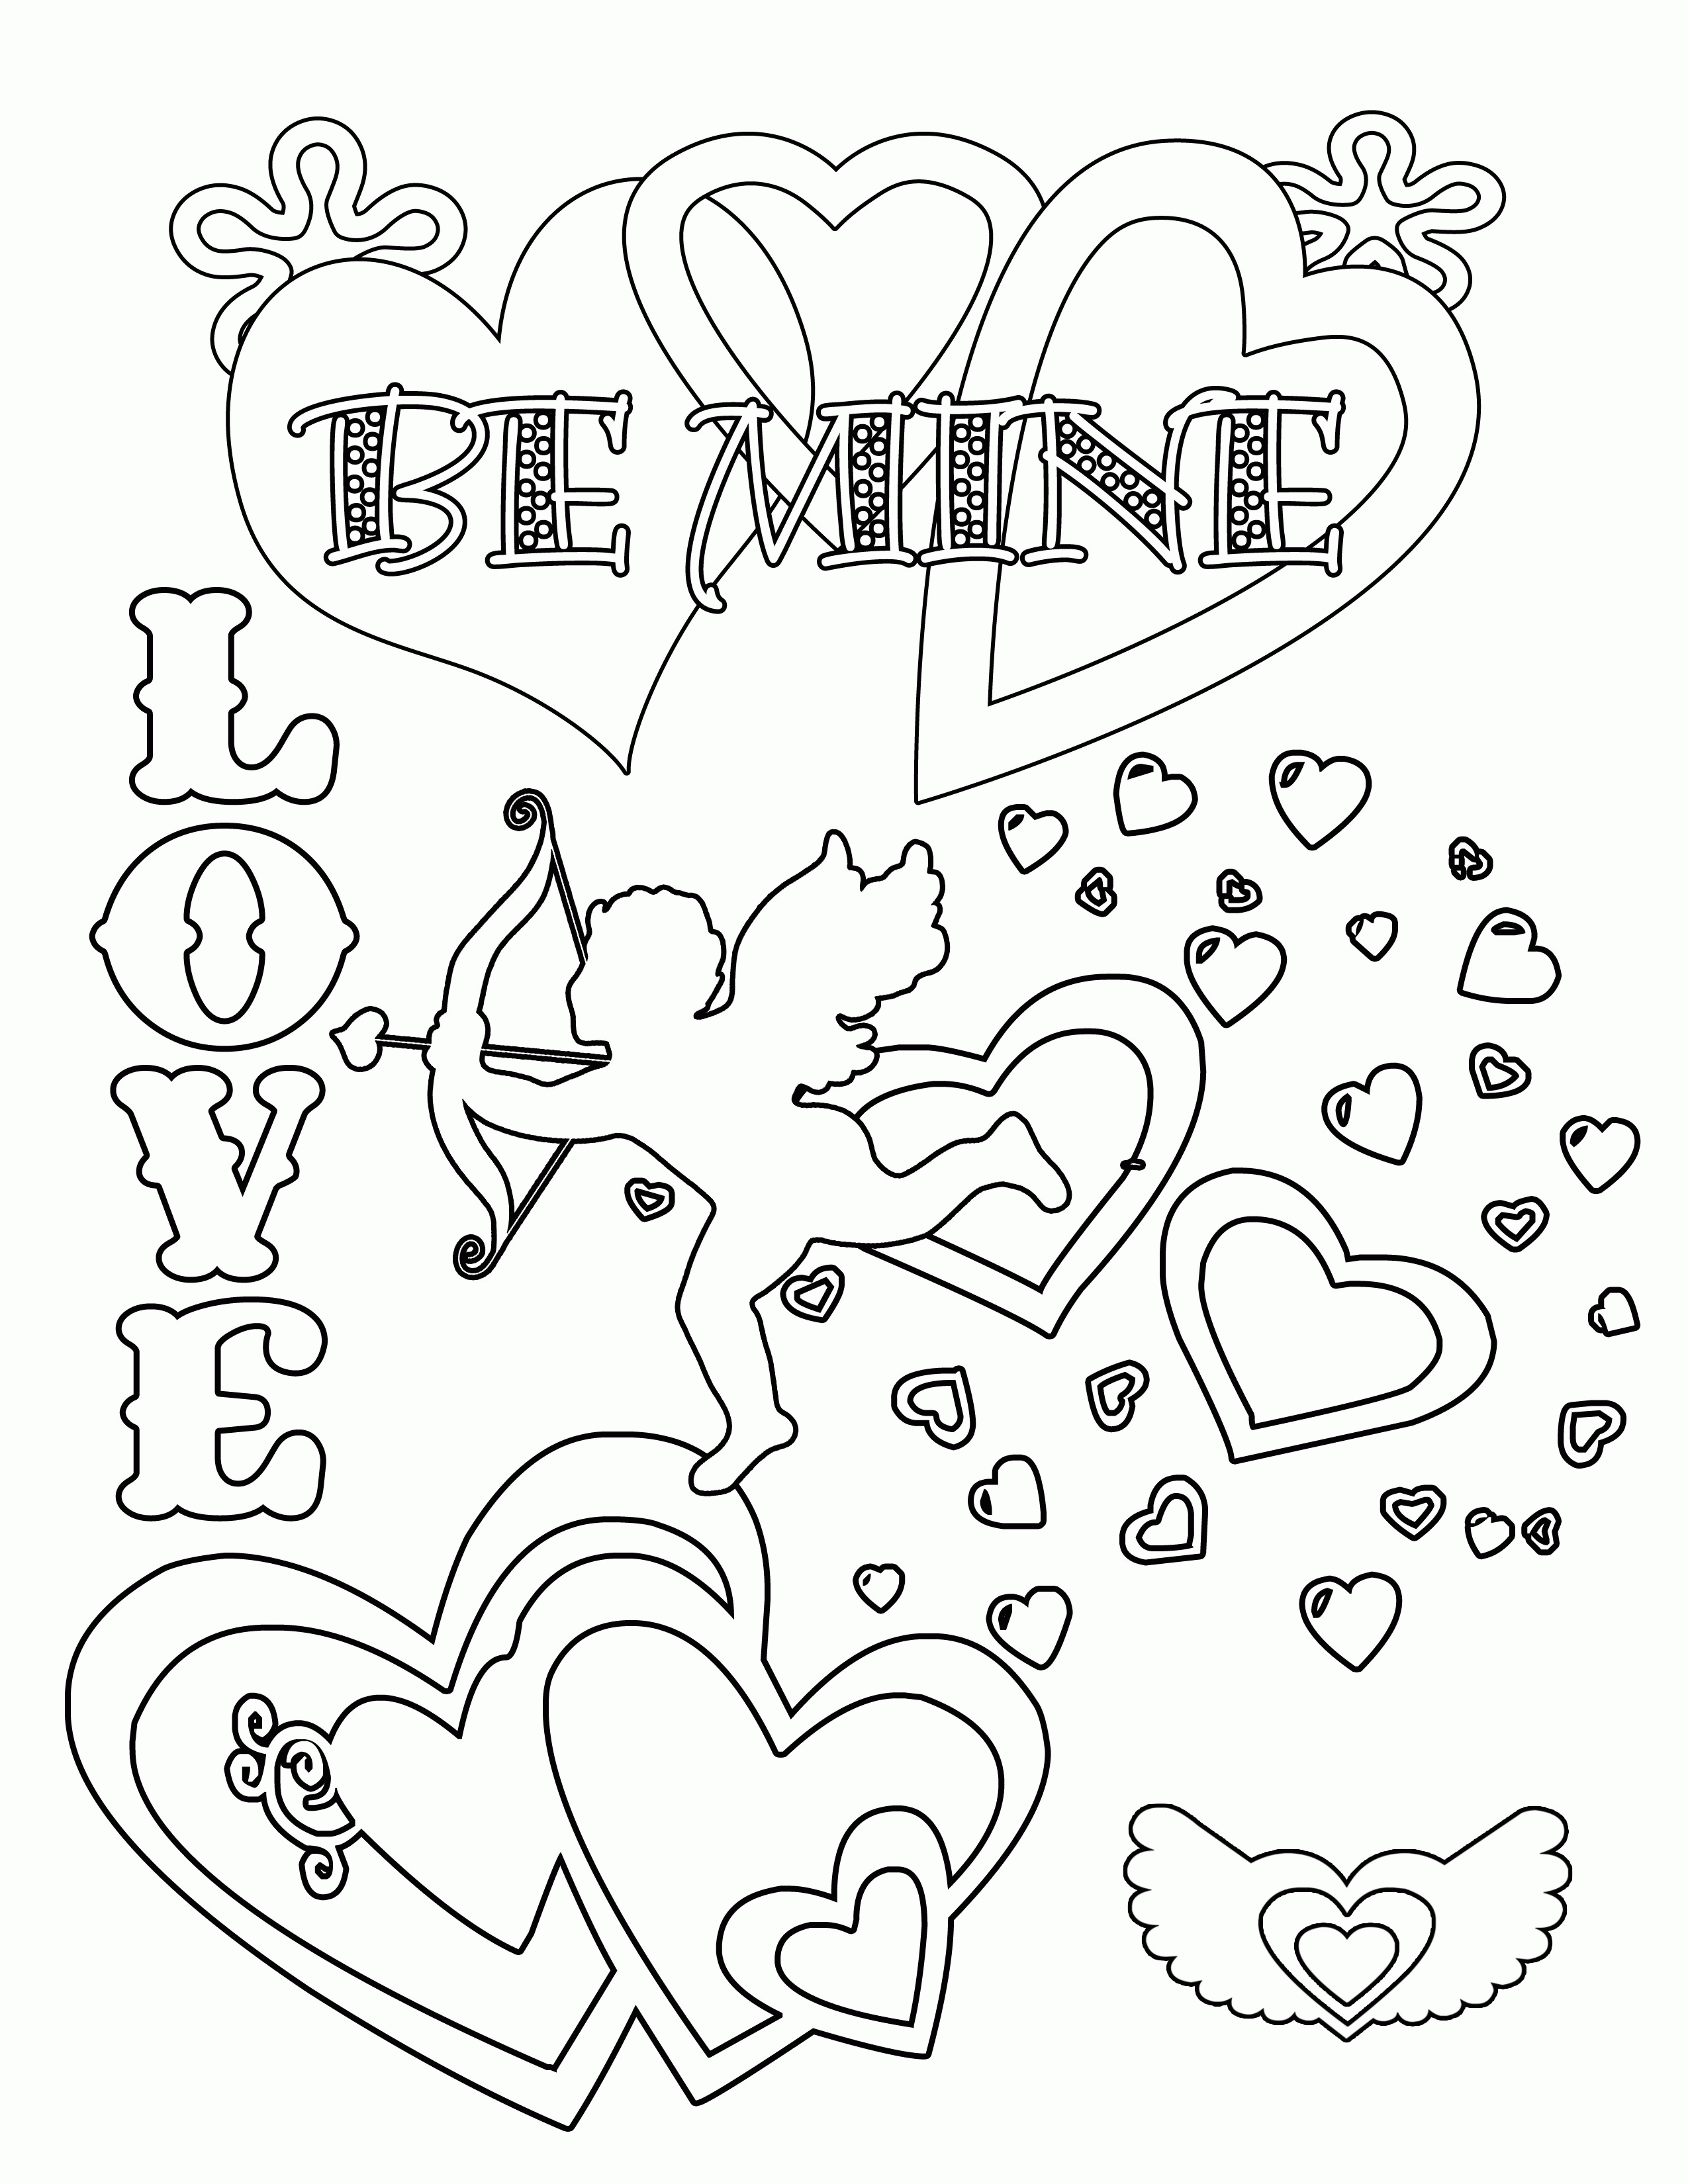 Coloring Pages for Teenagers Free Printable | Best Coloring Page Site